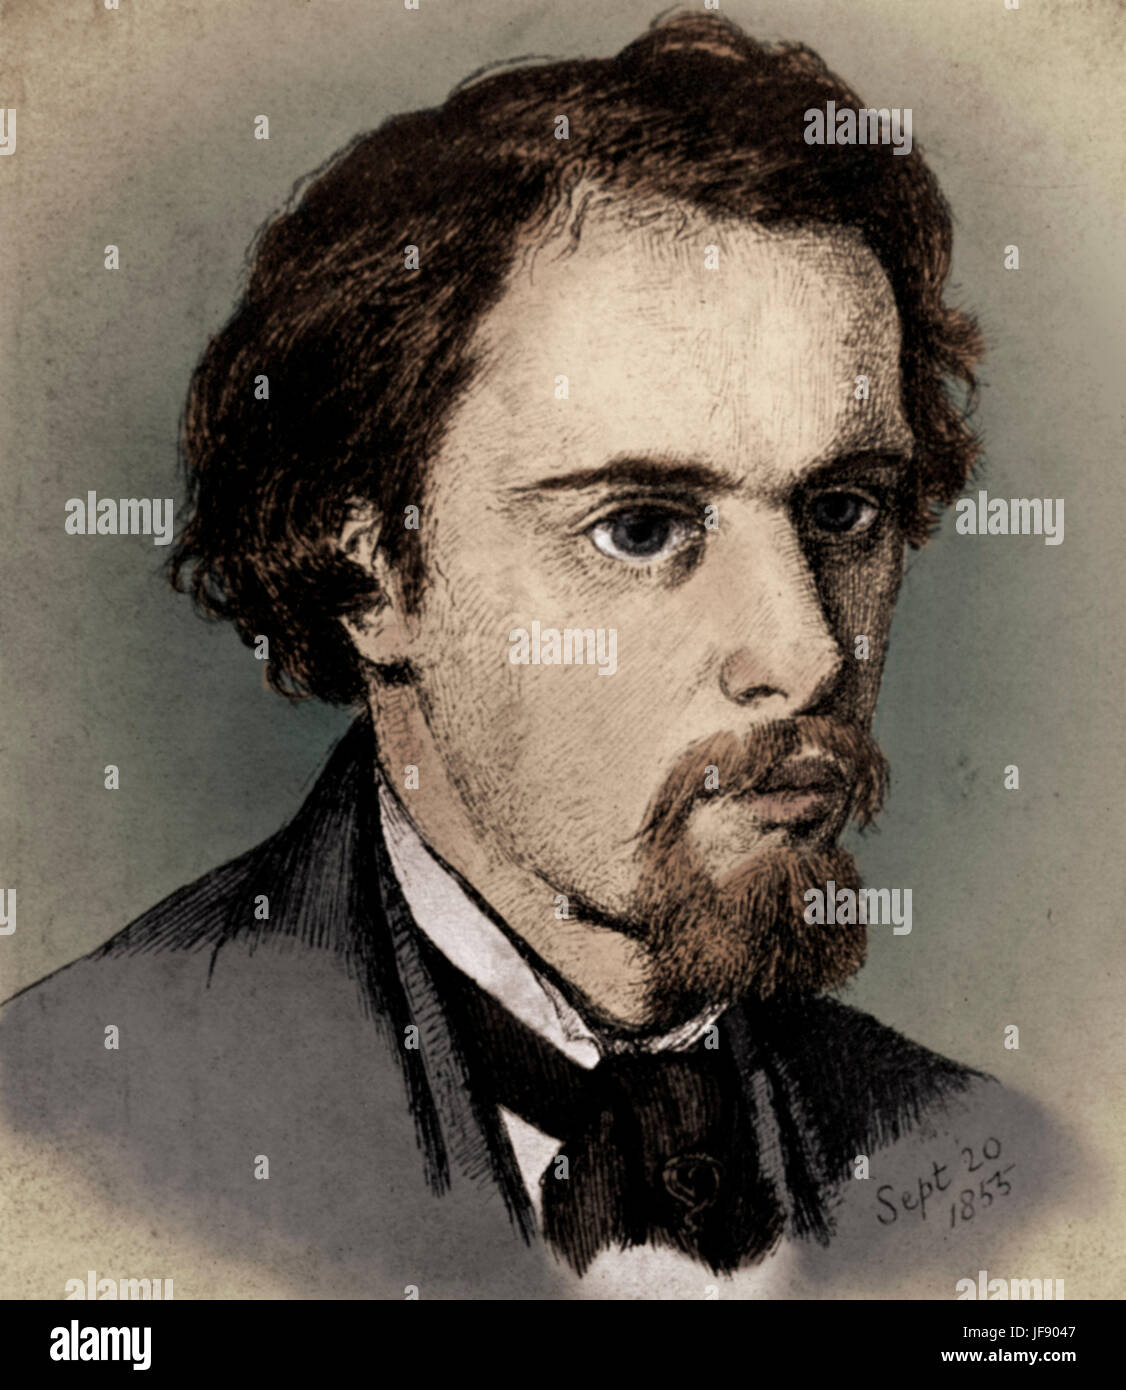 Dante Gabriel Rossetti, portrait by himself. English poet, painter and translator. 12 May  1828 - 10 April 1882 Stock Photo